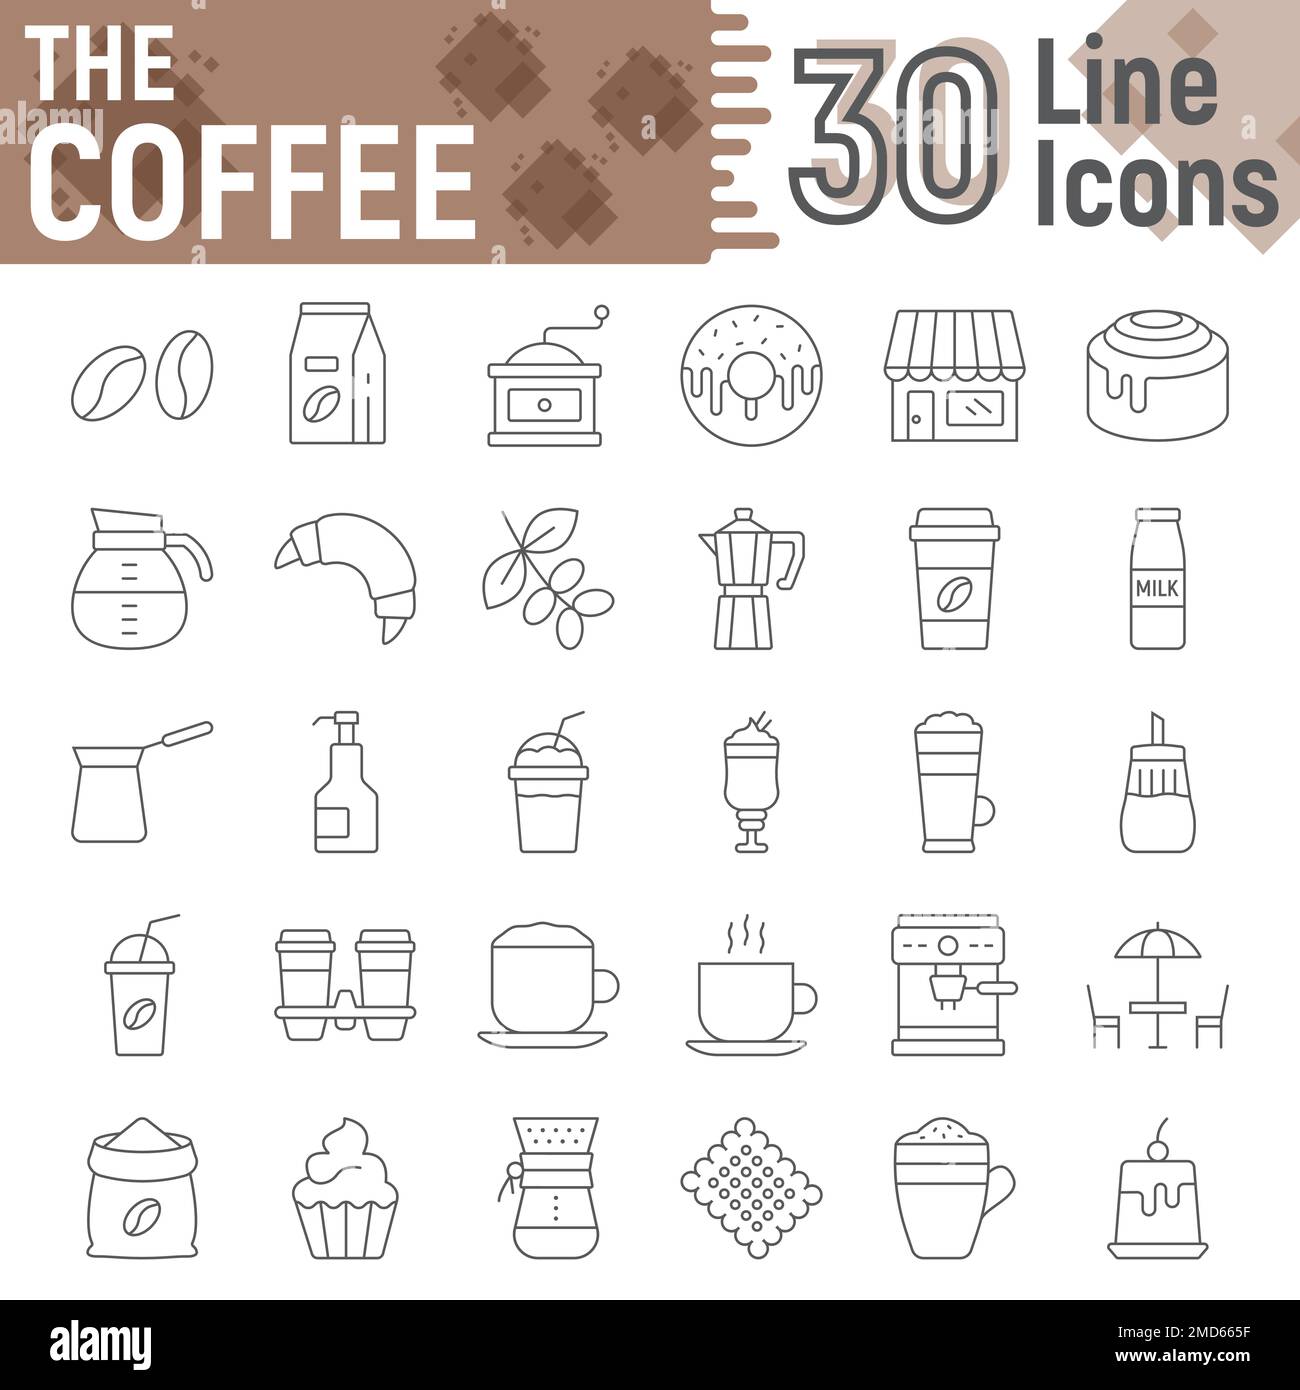 https://c8.alamy.com/comp/2MD665F/coffee-thin-line-icon-set-coffee-shop-symbols-collection-vector-sketches-logo-illustrations-sweets-signs-linear-pictograms-package-isolated-on-white-background-eps-10-2MD665F.jpg